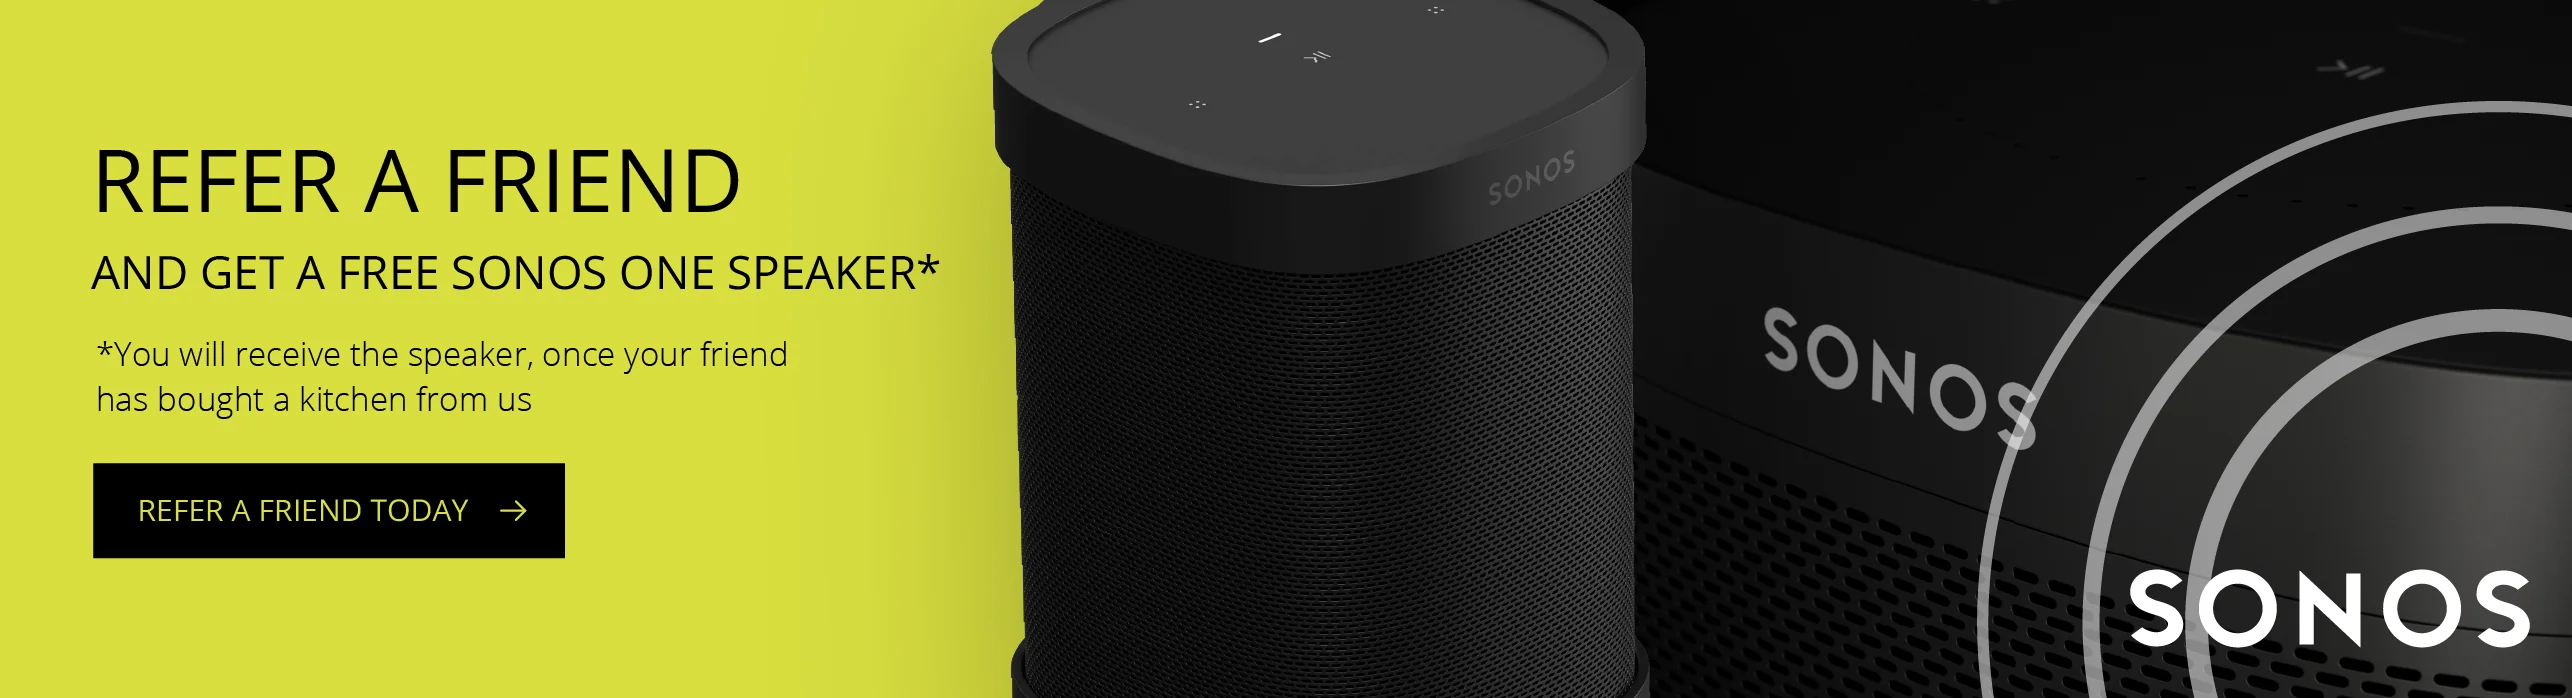 Refer a friend and receive a free Sonos speaker